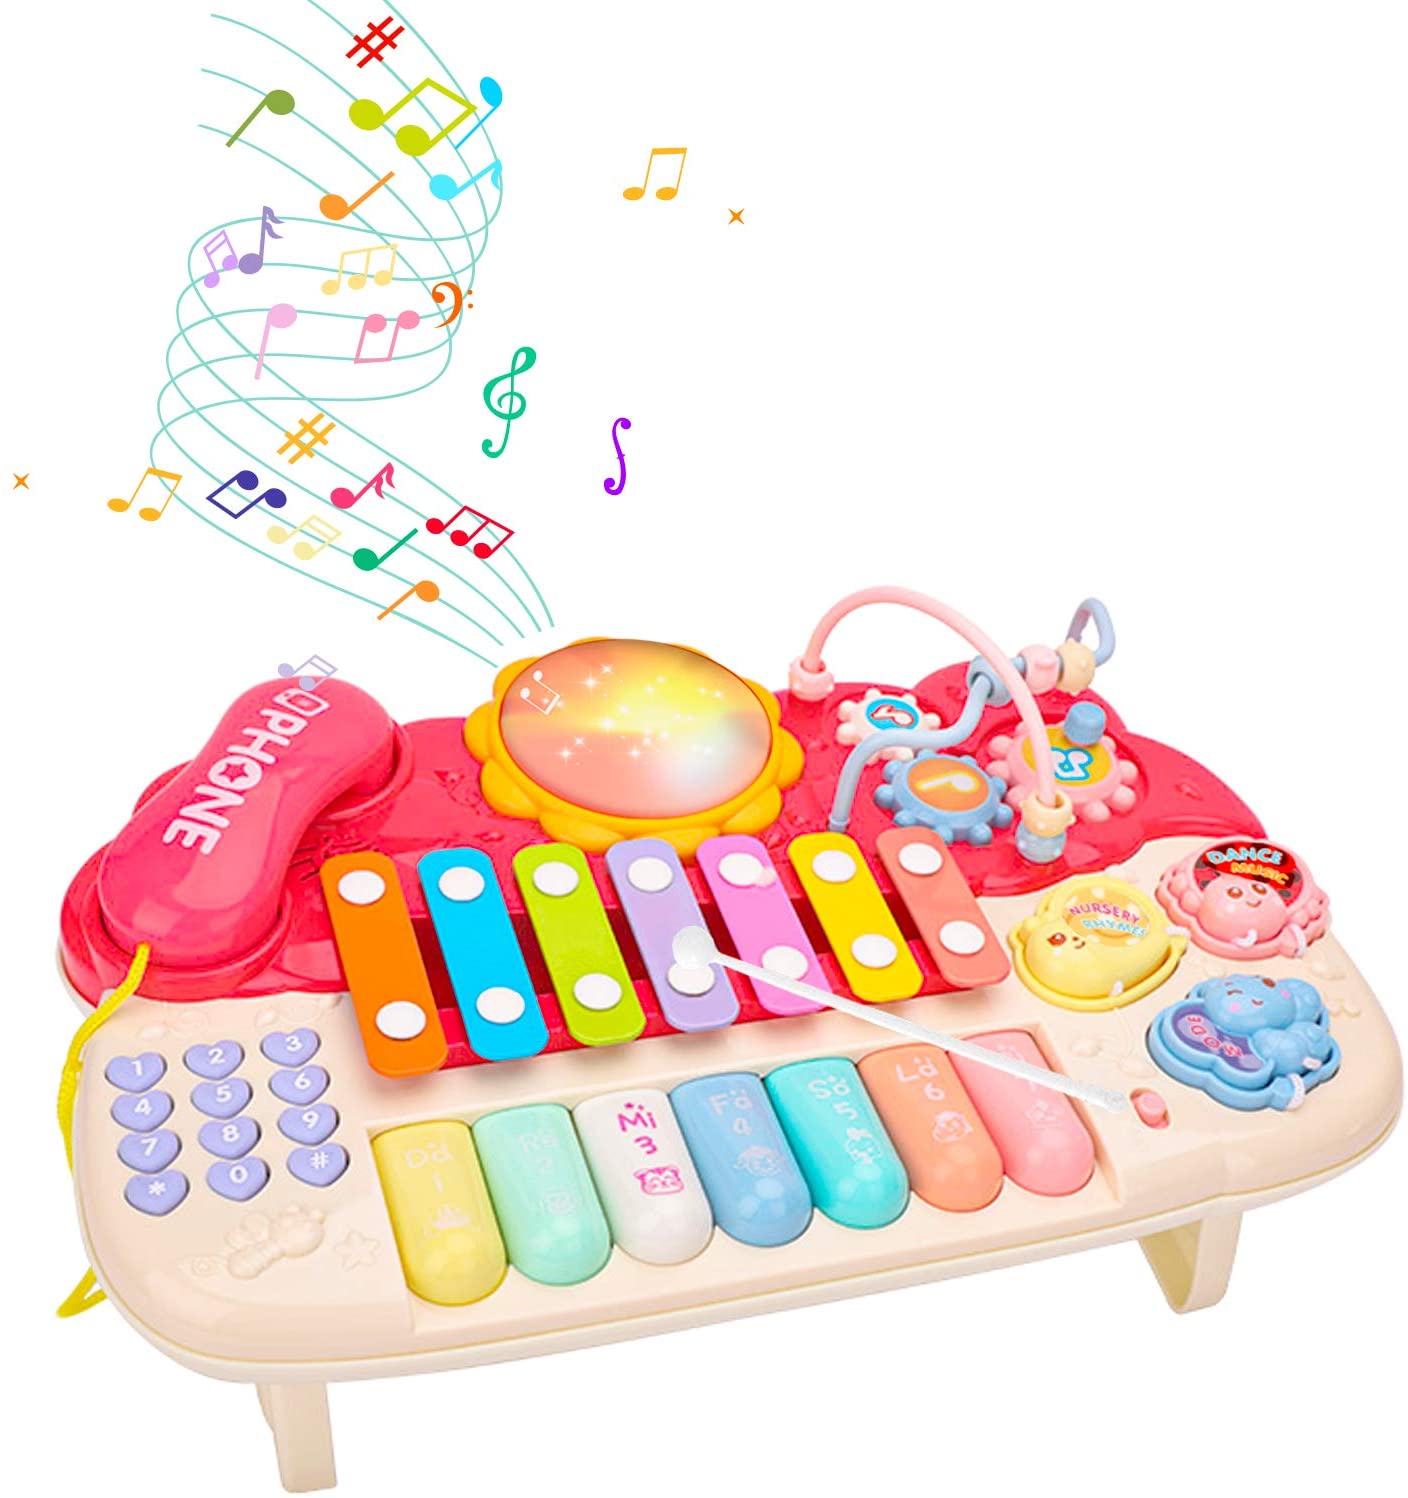 Cheapest Factory Wooden Excavator Toy - Arkmiido Baby Musical Toys – Drum Toy Set with Phone Bead Maze Gear Xylophone Piano – Mucial Toys for Toddlers Learning Toys for 18+ Boys Girls ...